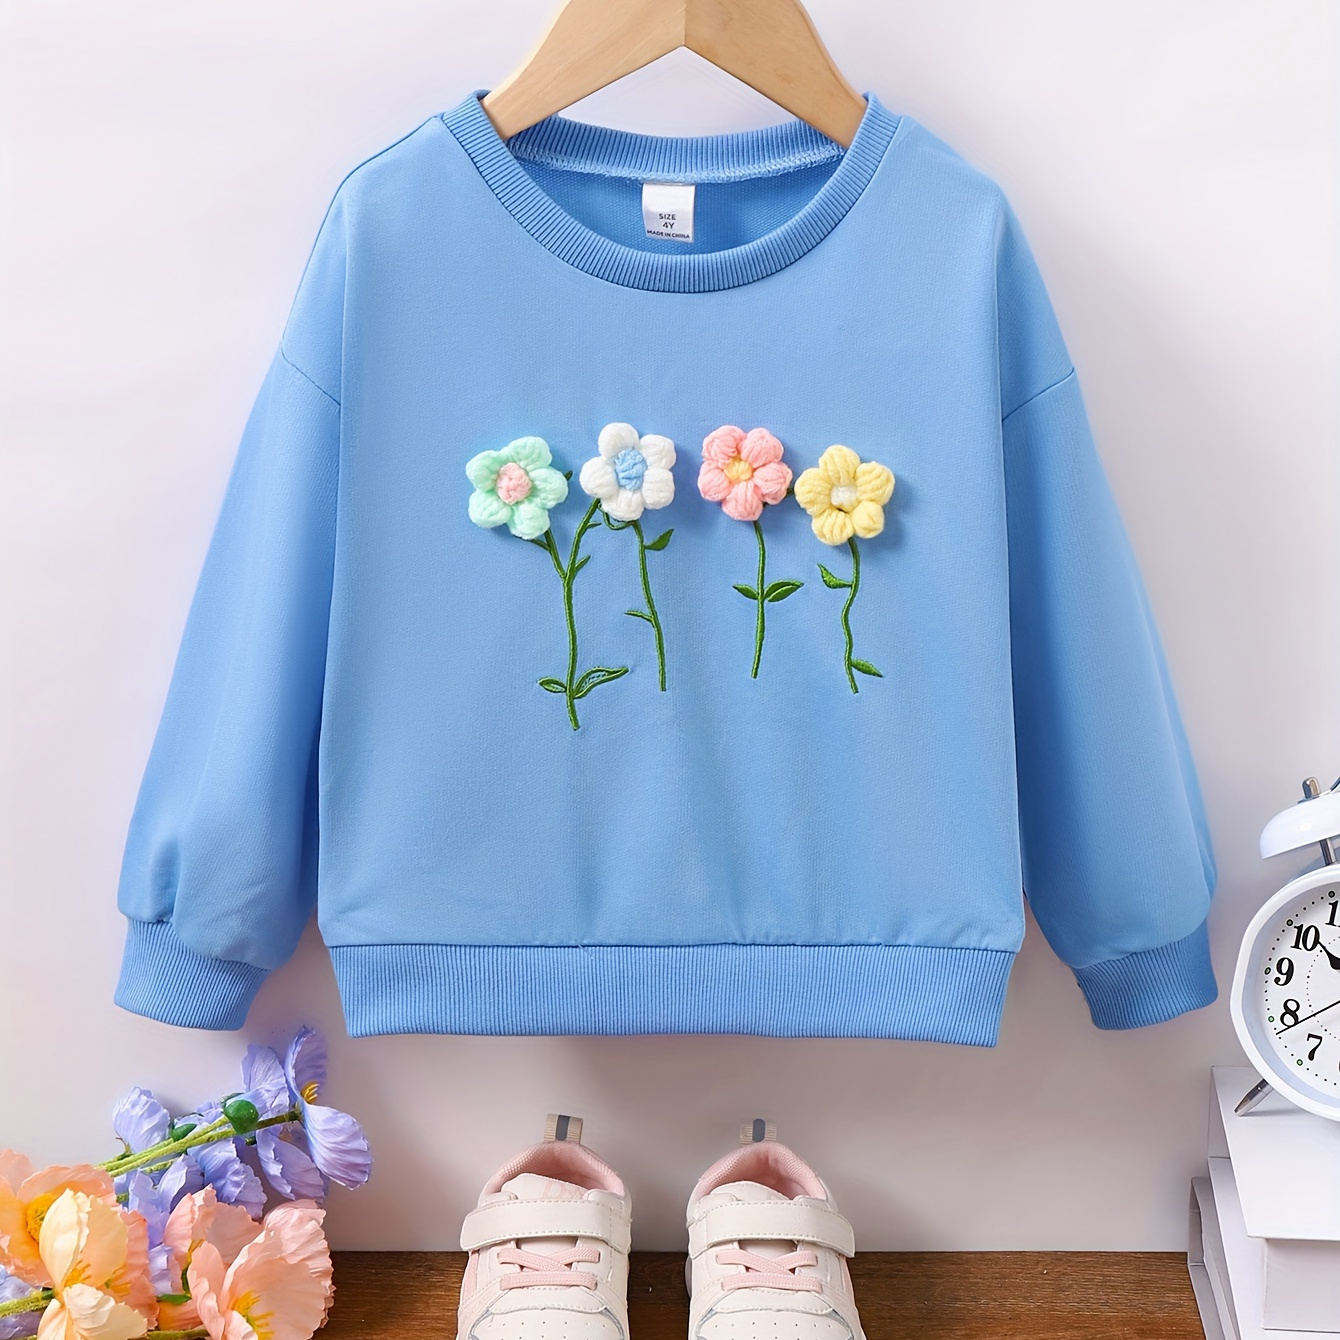 

Cute Knit Flowers Decor Girls Casual Pullover Long Sleeve Sweatshirt Active Loose Tops Outdoor, Party, Gift